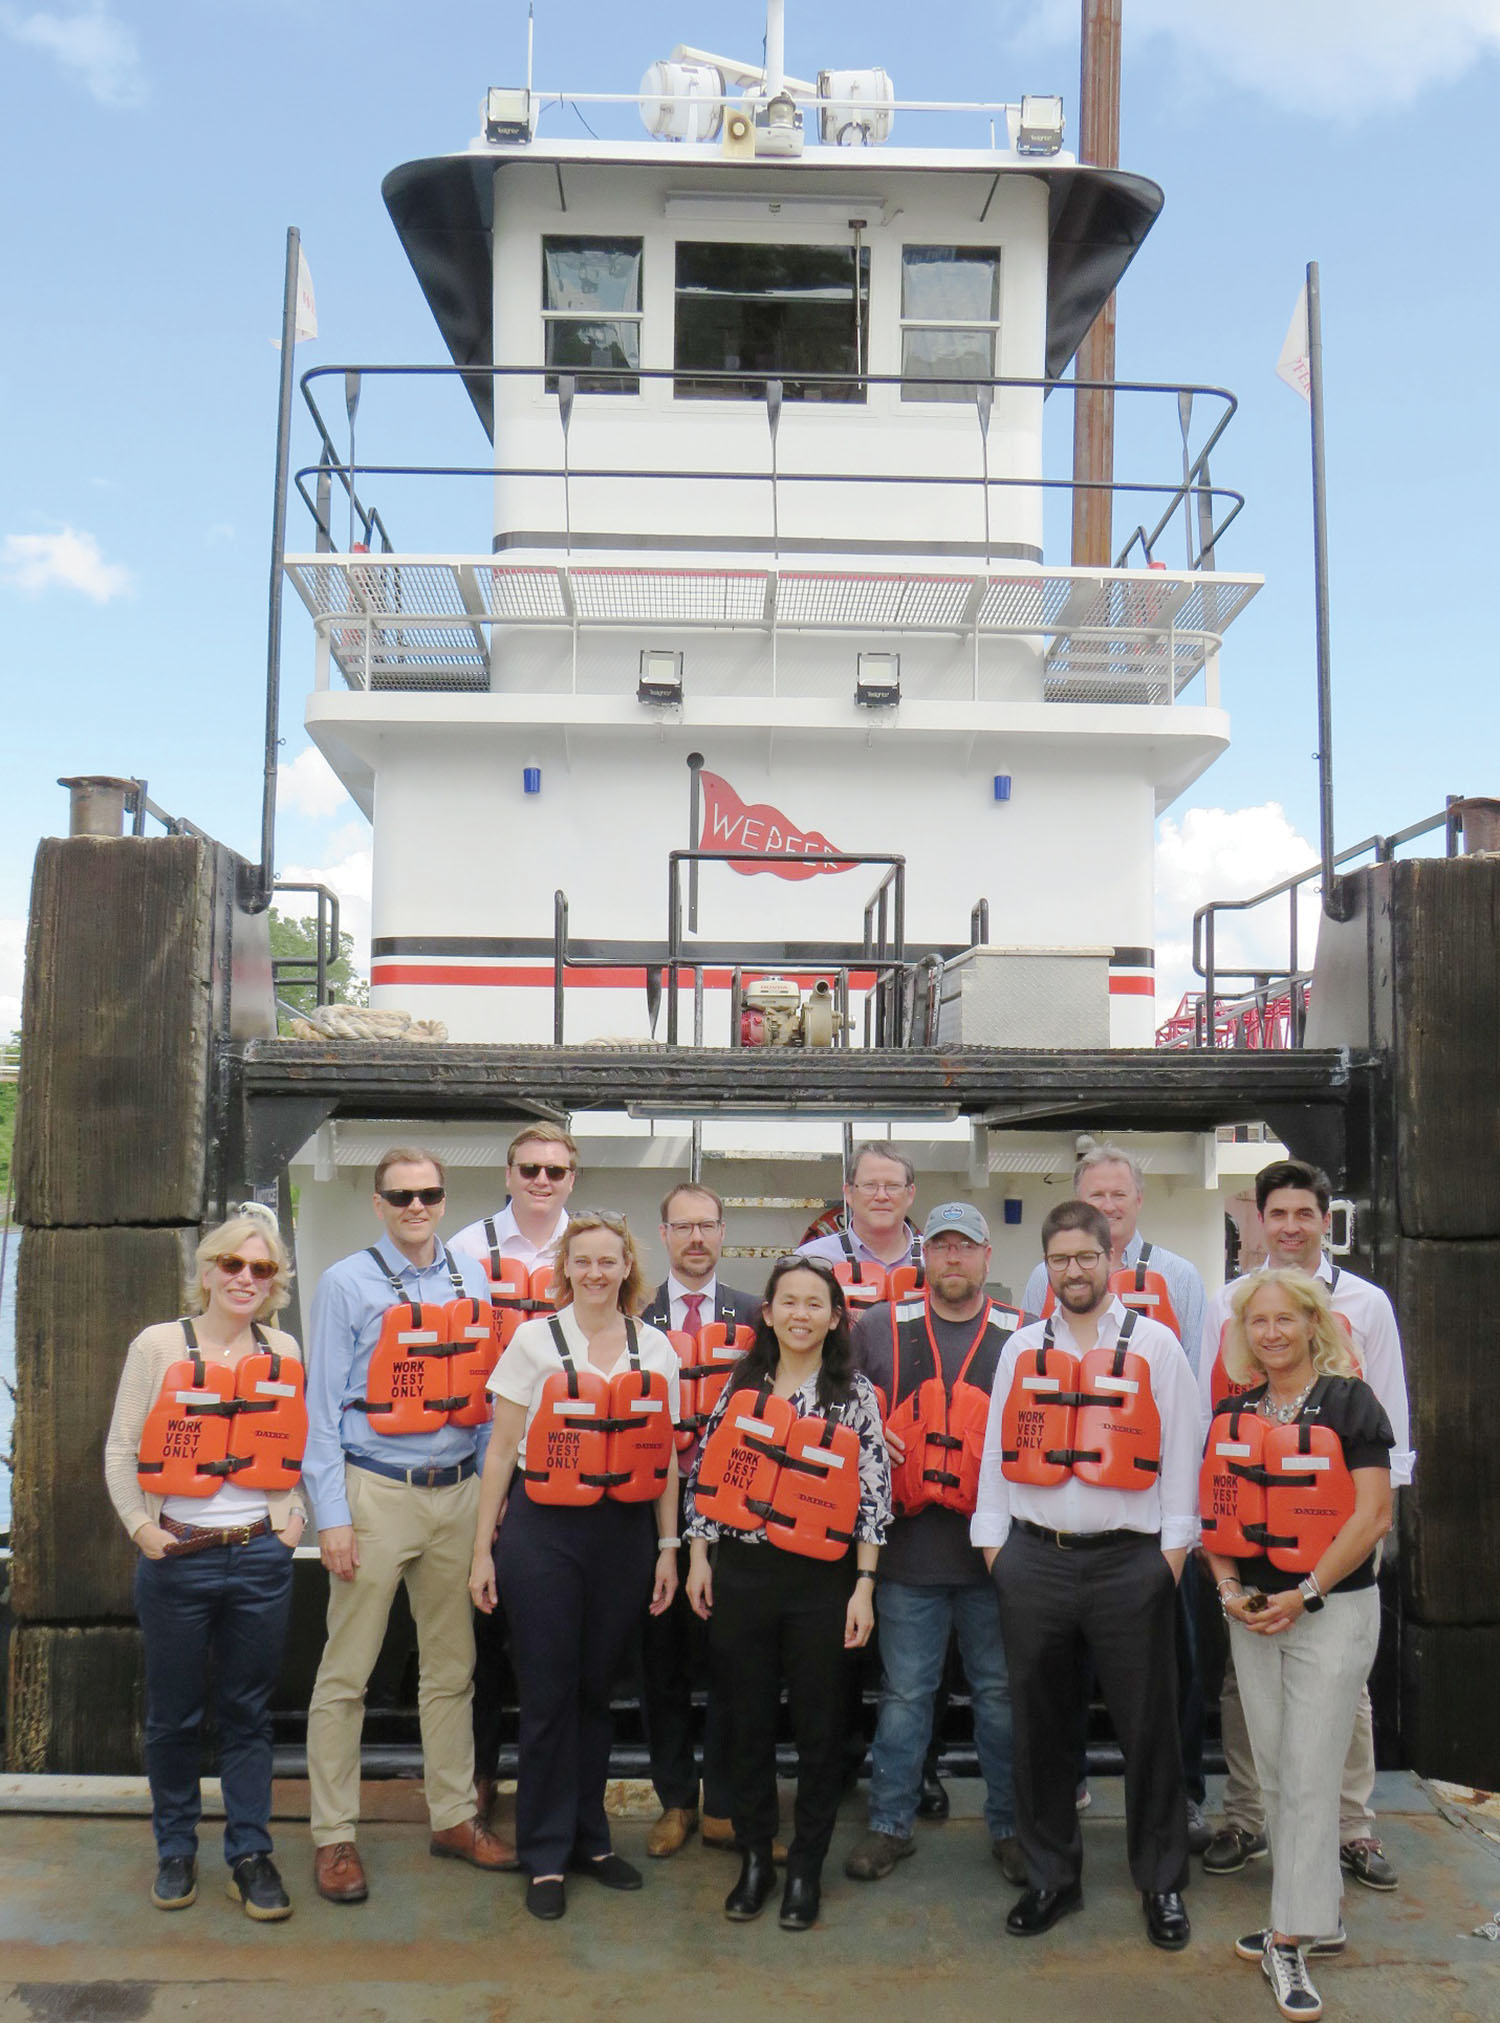 Embassy transportation and logistics counselors pose in front of the mv. Chris Foster during a tour of transportation facilities in Memphis May 14. (Photo courtesy of Ken Eriksen)